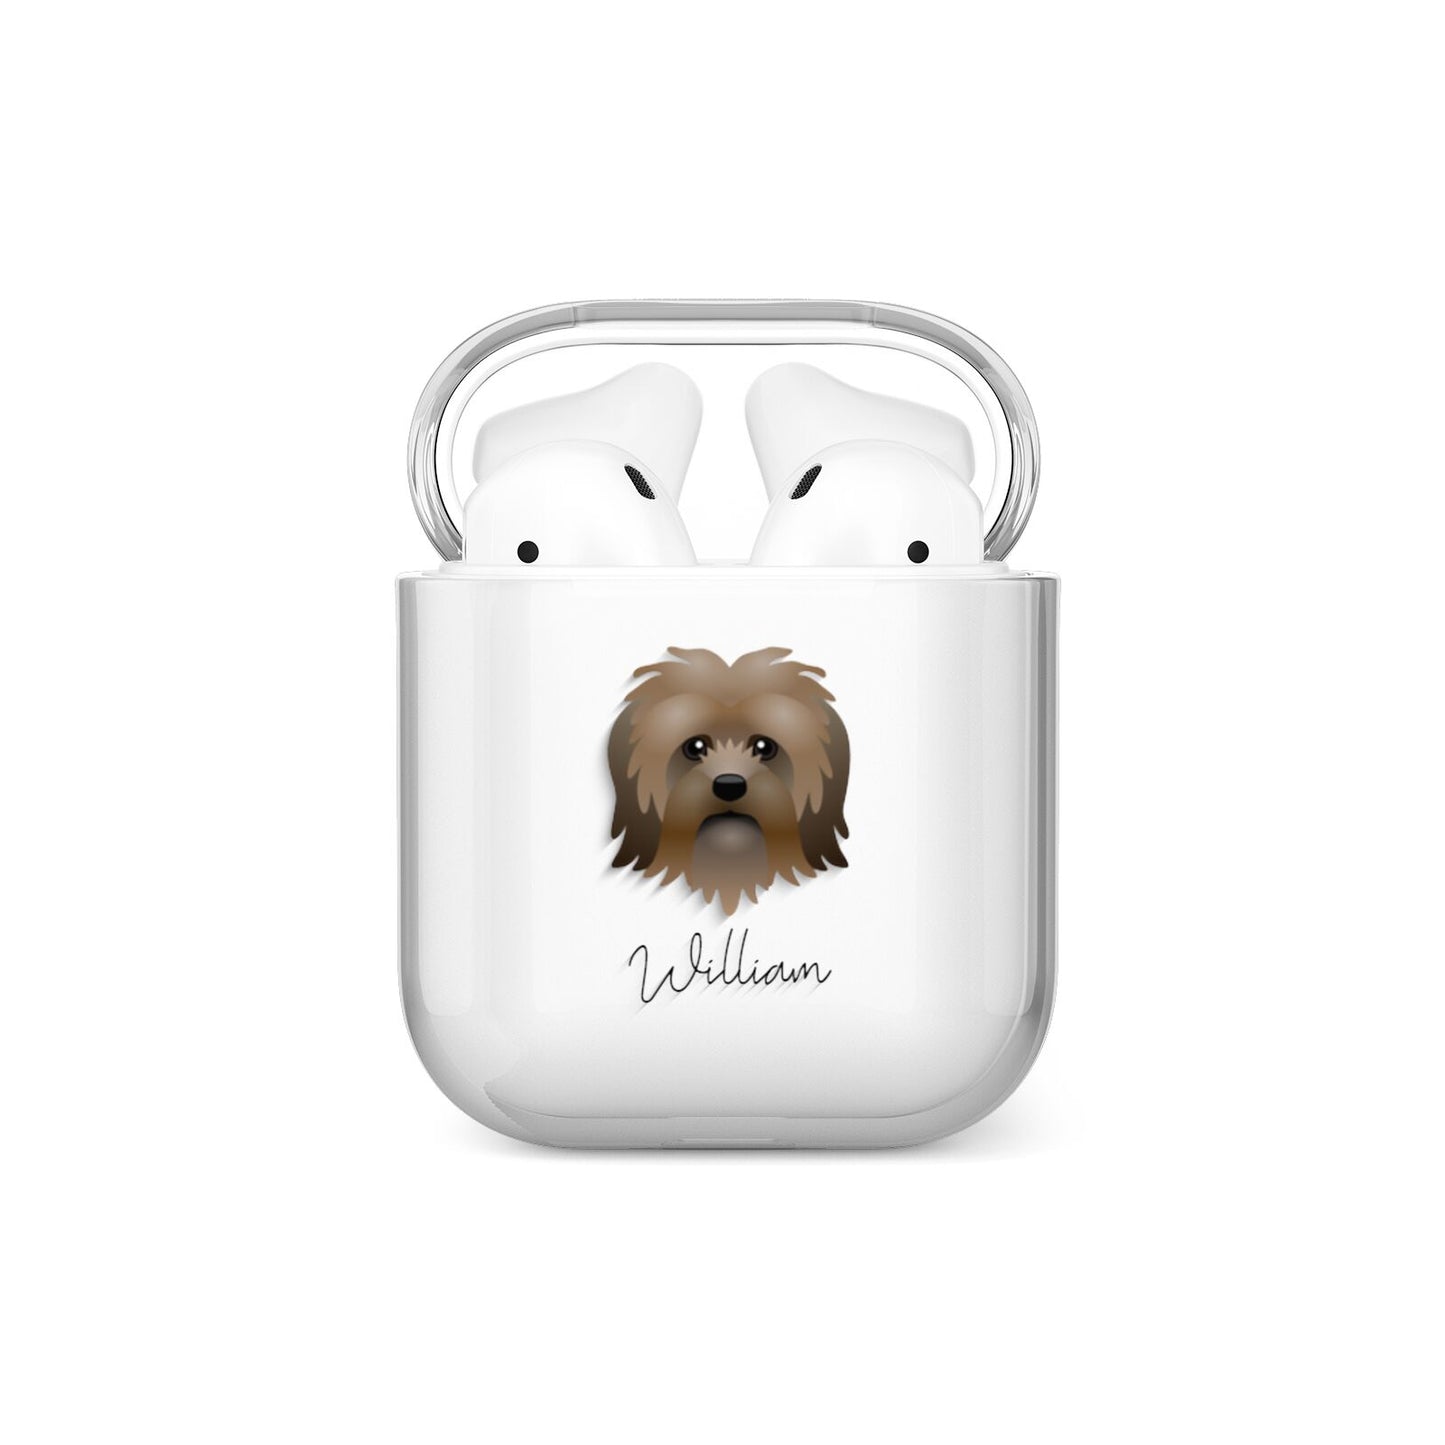 Lo wchen Personalised AirPods Case